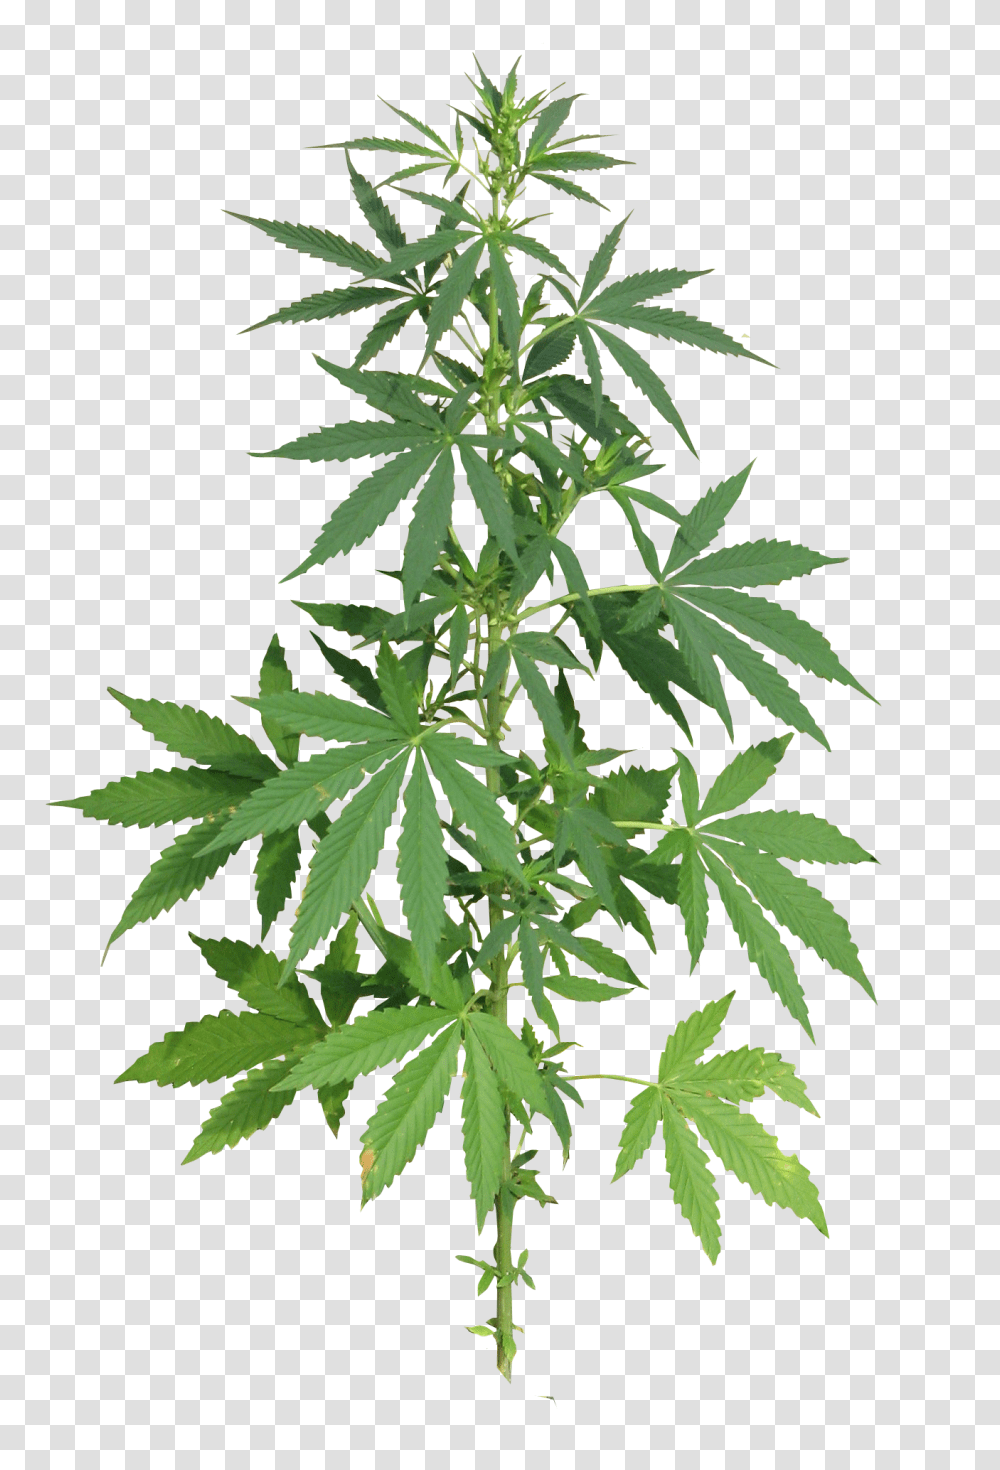 Cannabis Plant Full Image Weed, Hemp Transparent Png